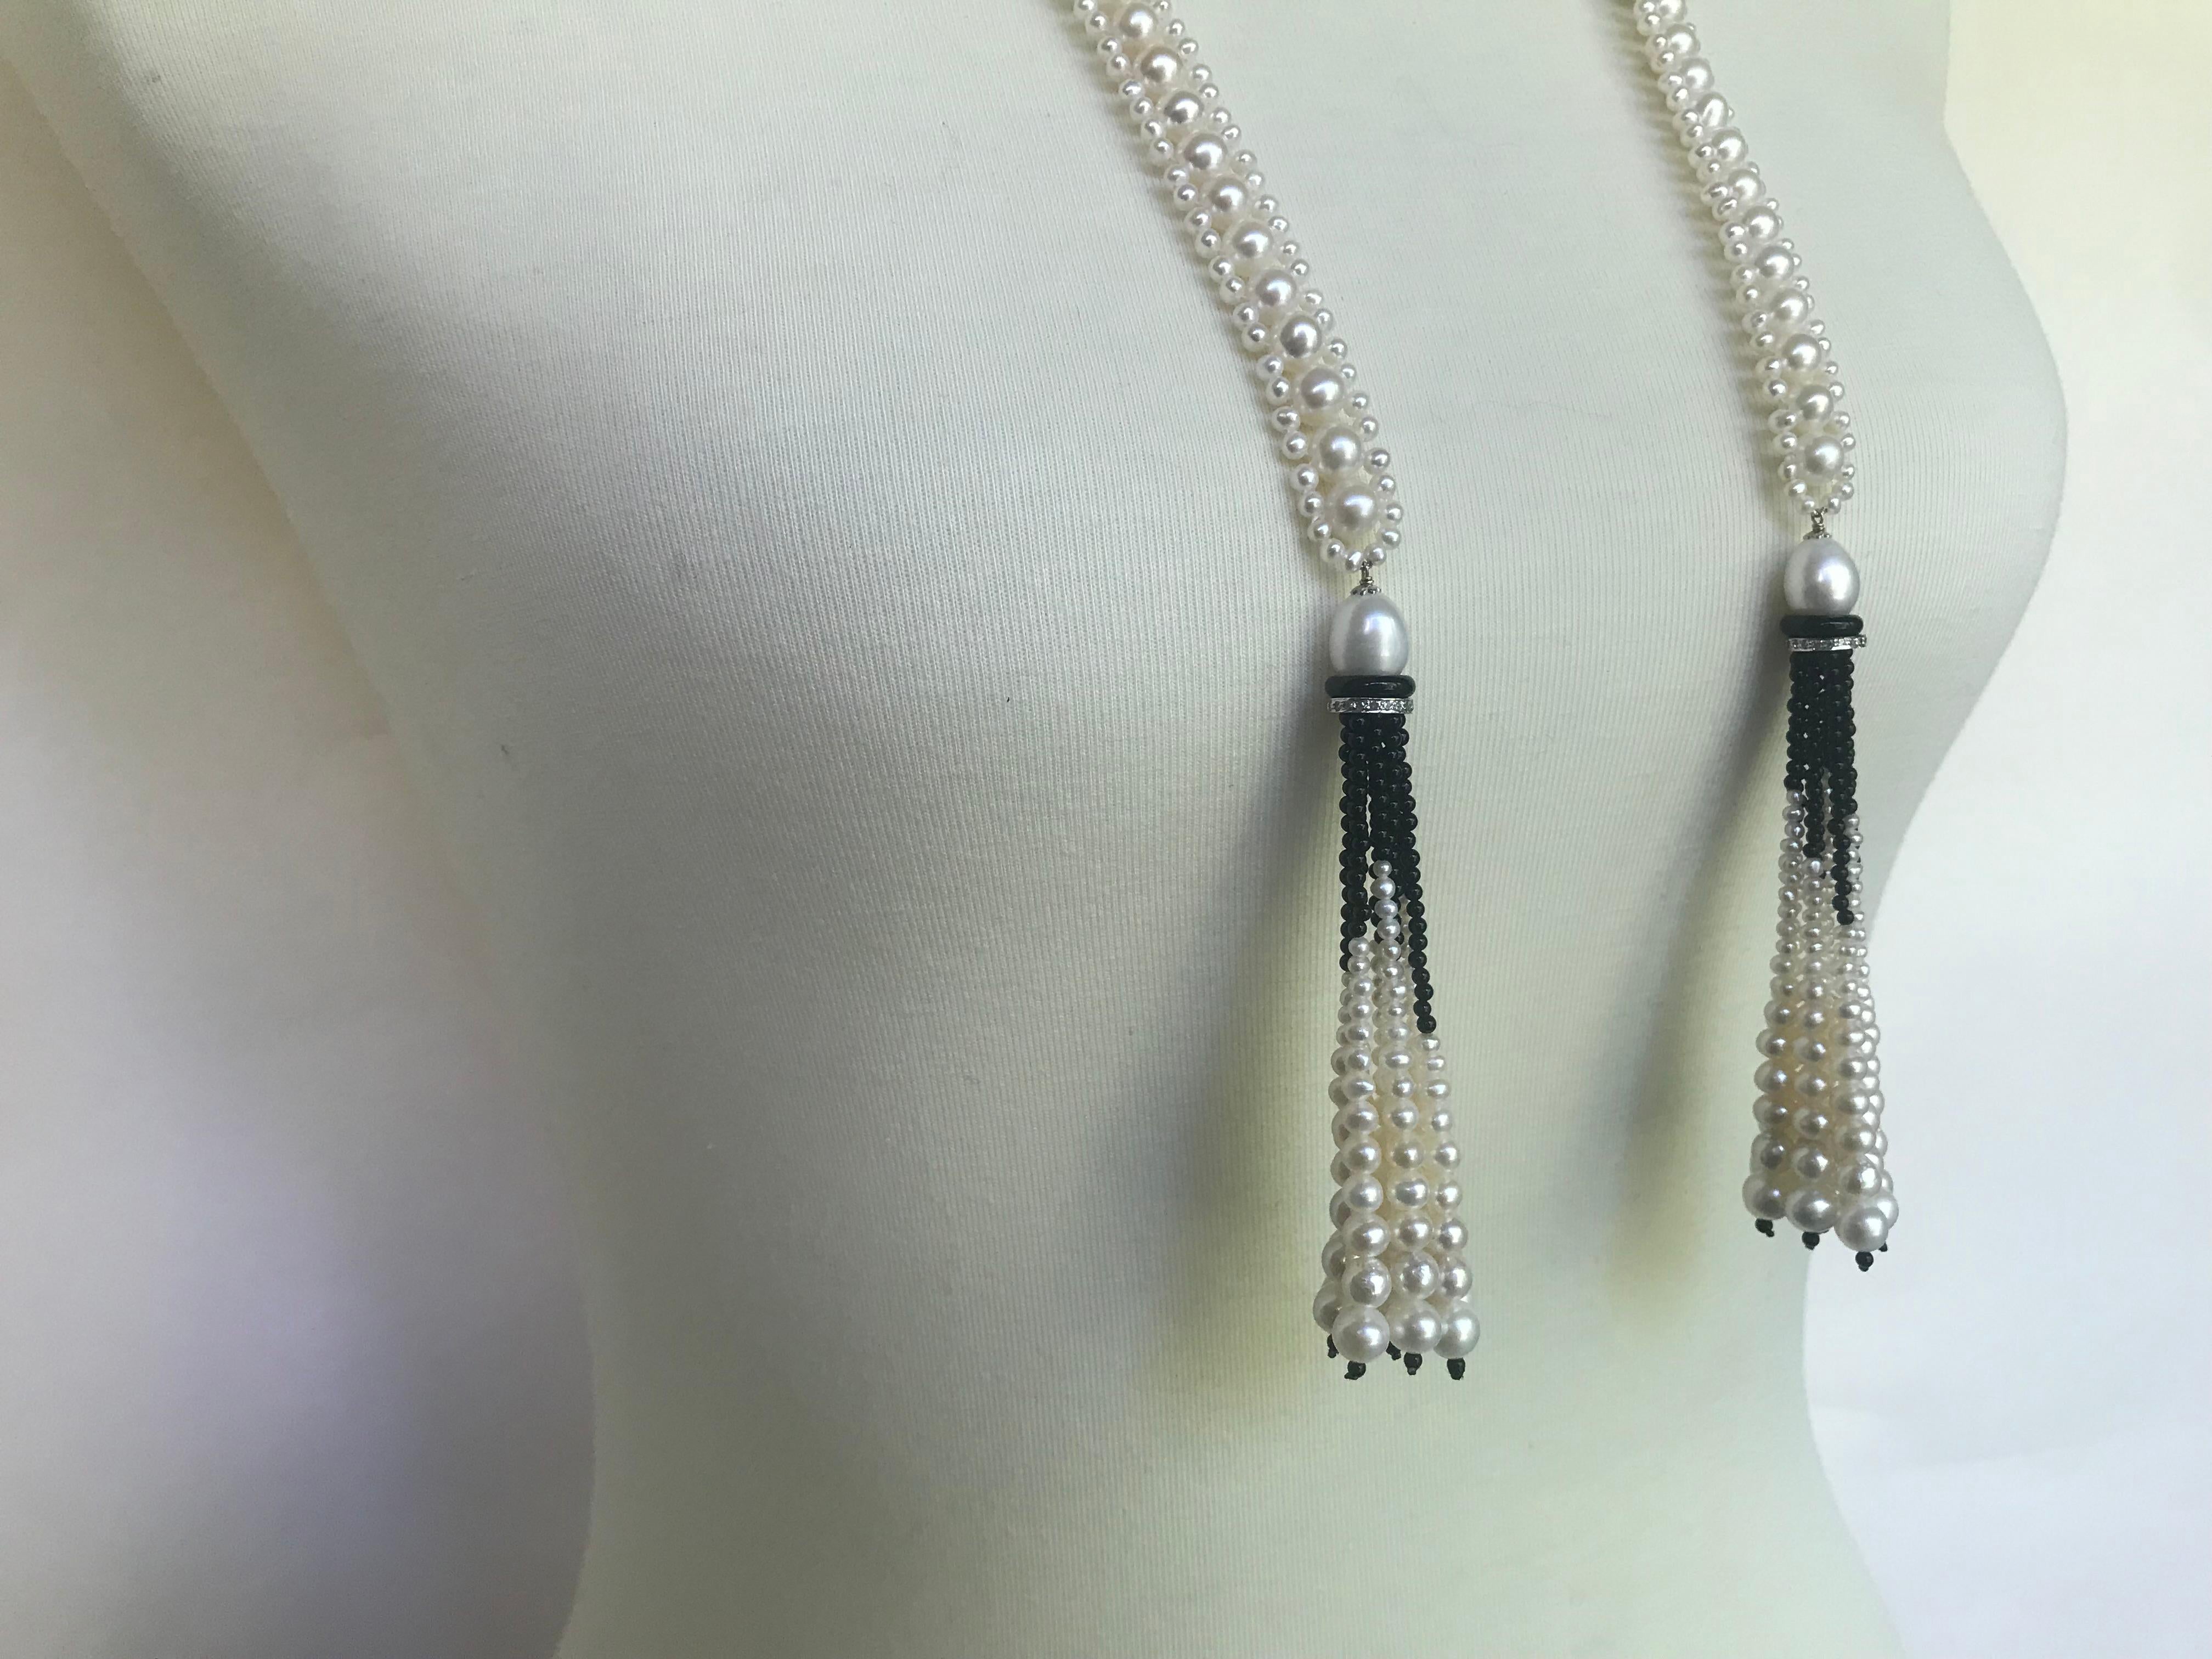 Marina J Woven Pearl Sautoir with Tassels and 14 K White Gold and Onyx beads 8